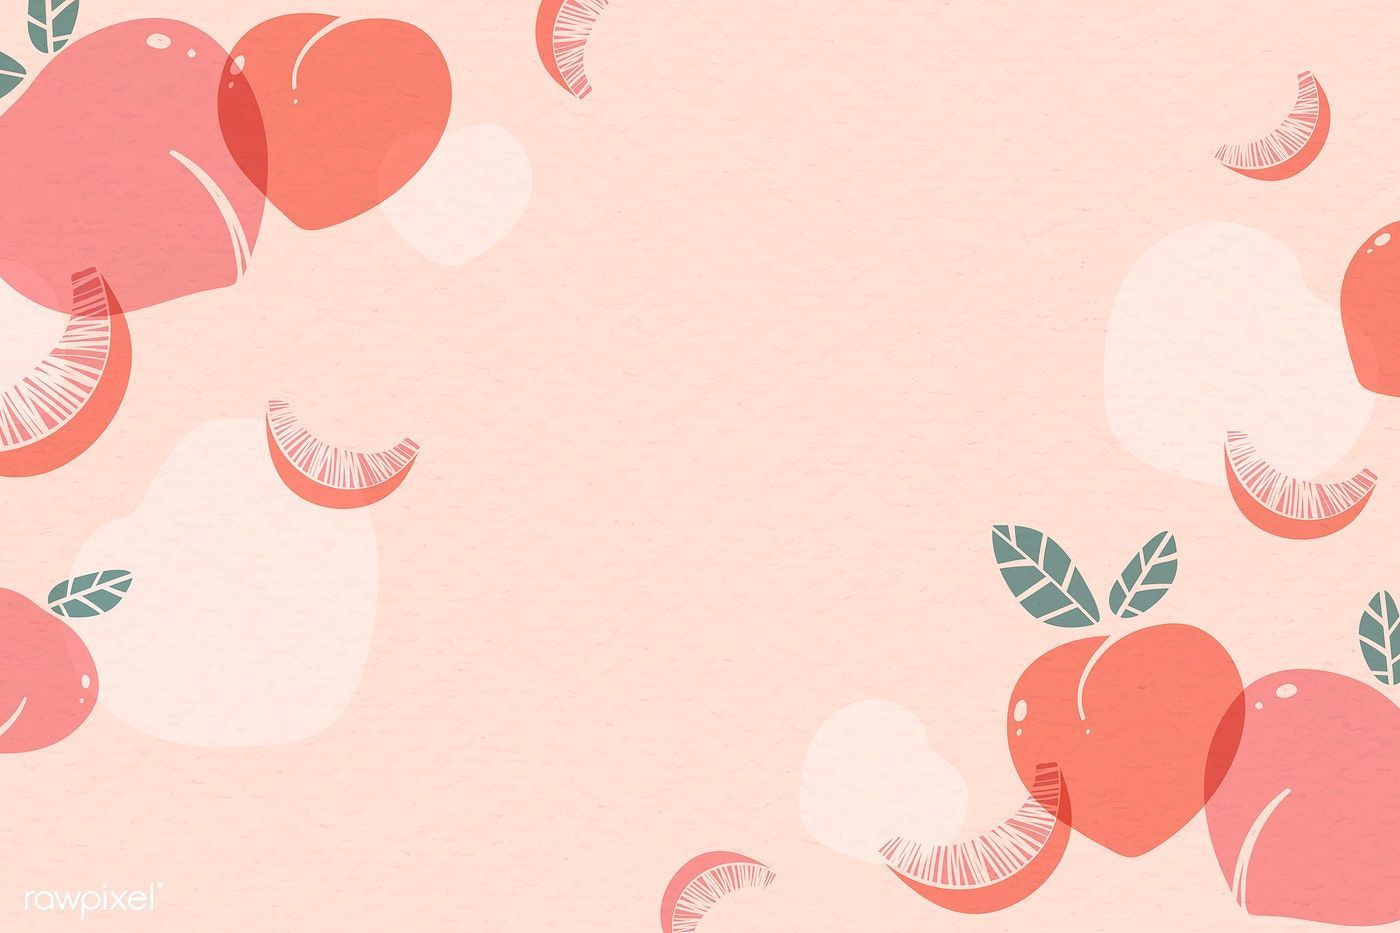 Download premium vector of Peach patterned background with design